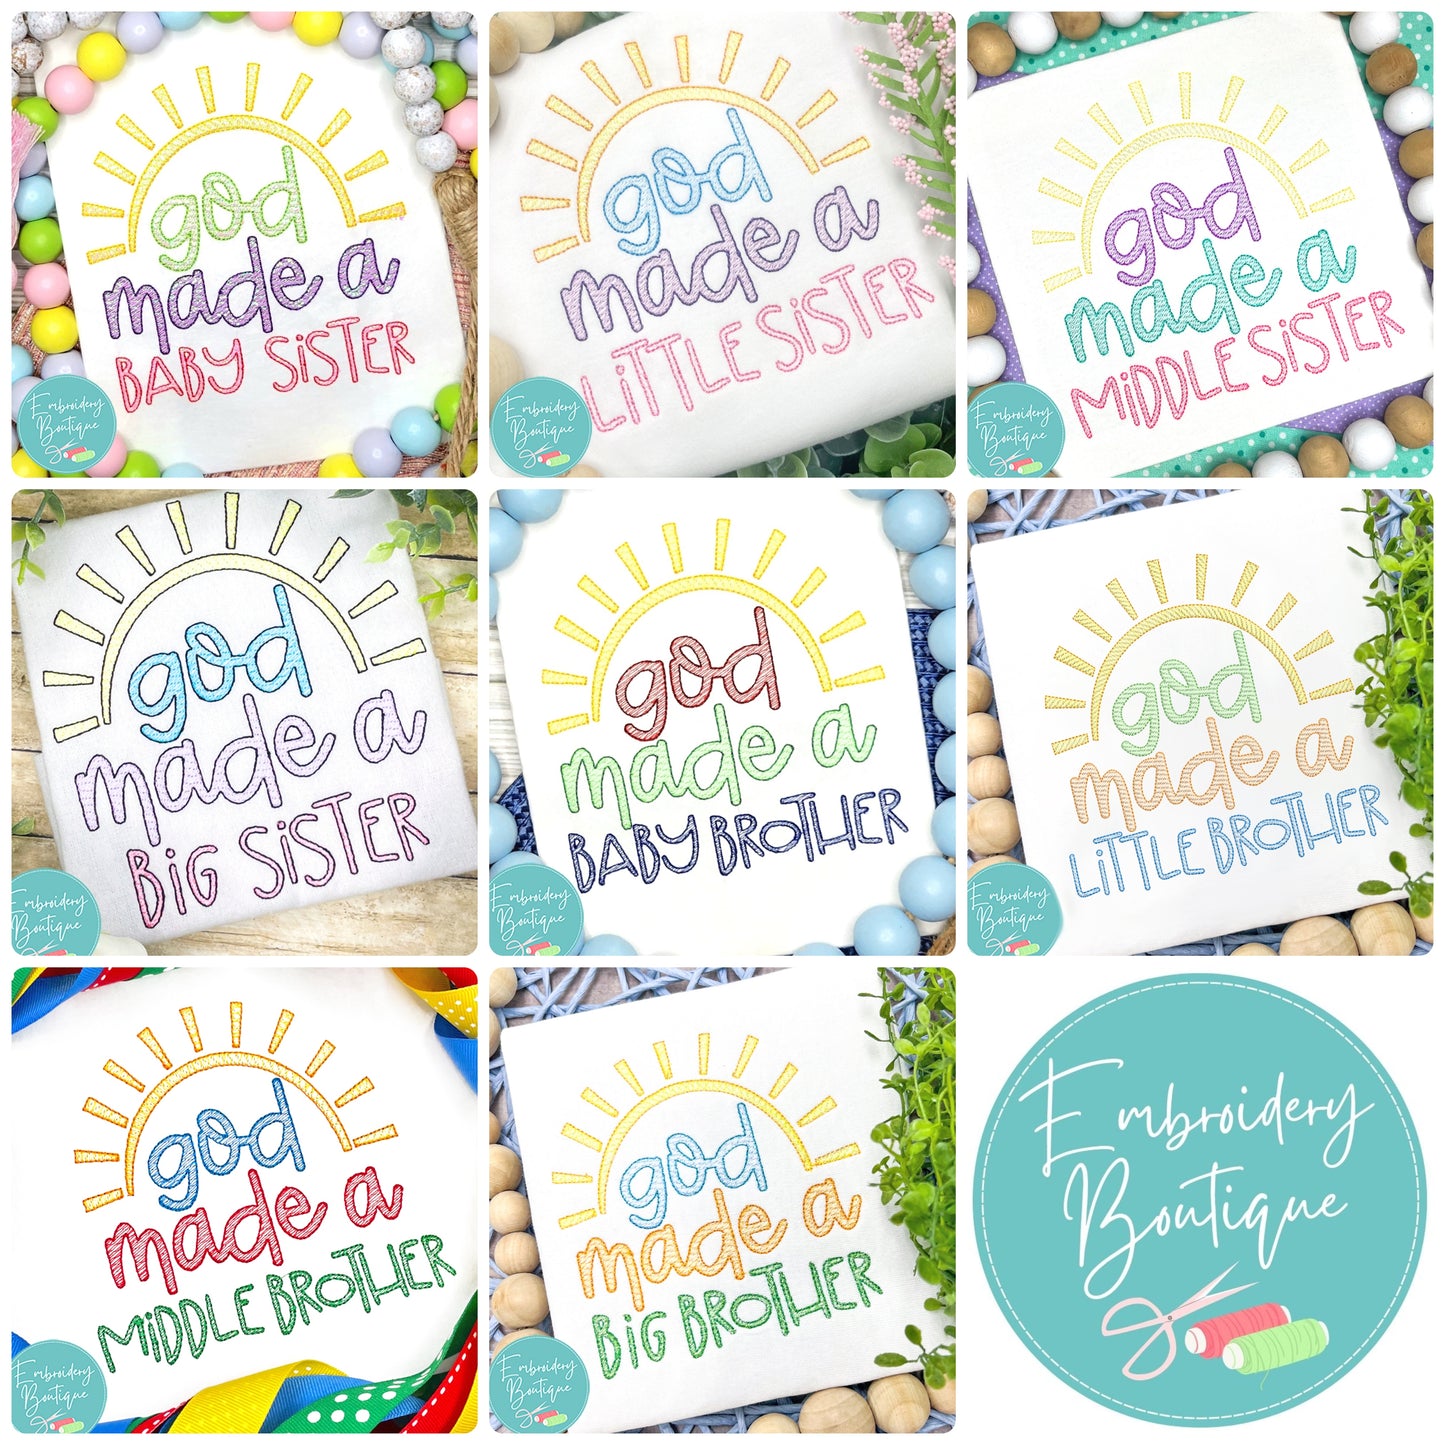 God Made Sun Sketch Embroidery Bundle, Embroidery Design, Embroidery Boutique